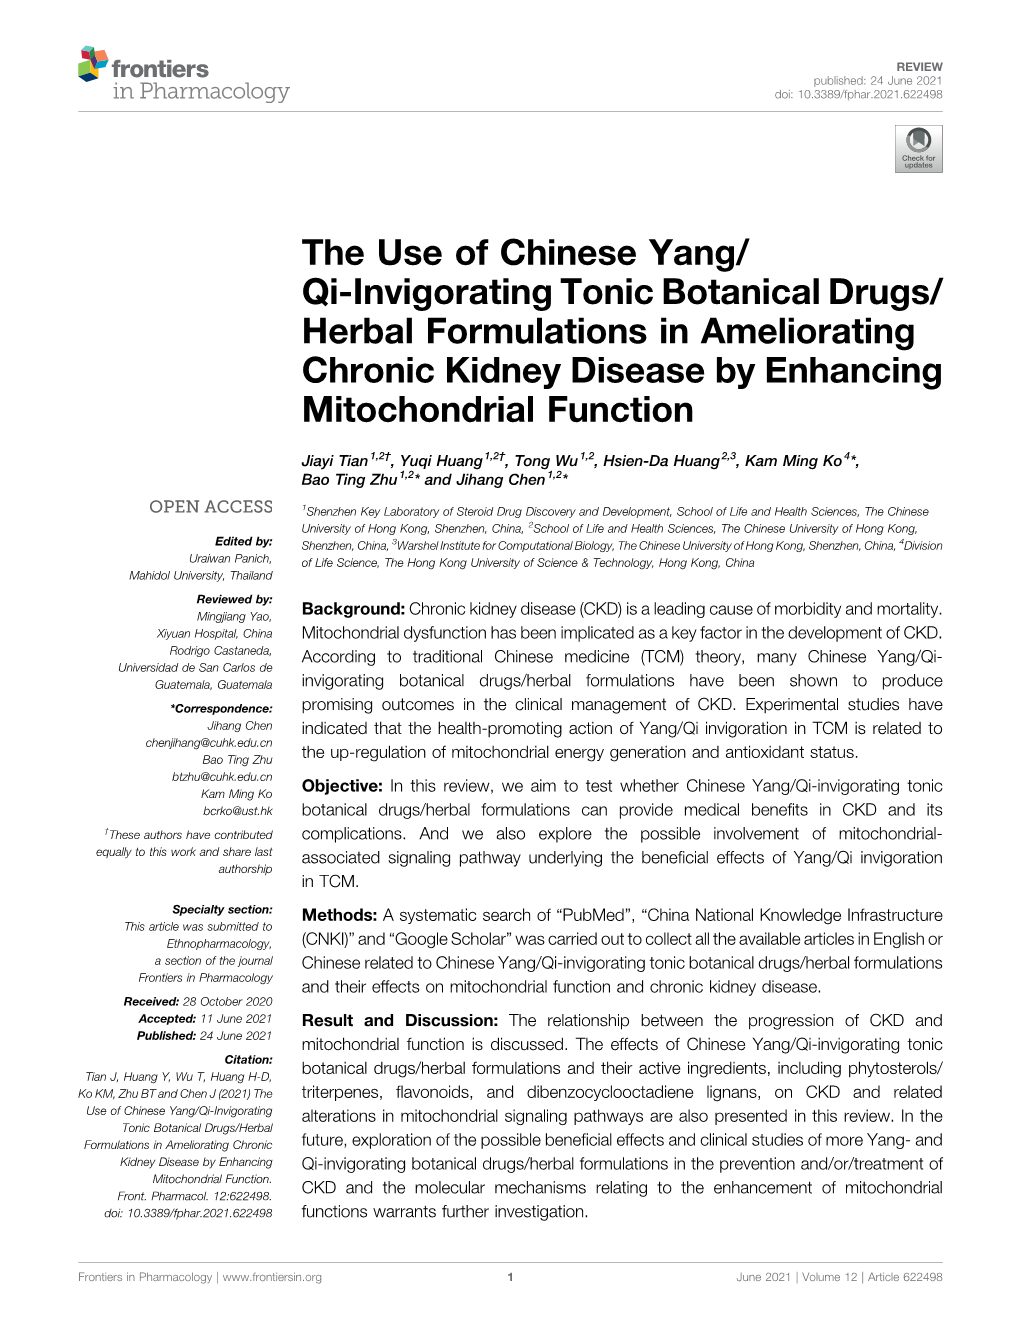 The Use of Chinese Yang/ Qi-Invigorating Tonic Botanical Drugs/ Herbal Formulations in Ameliorating Chronic Kidney Disease by Enhancing Mitochondrial Function